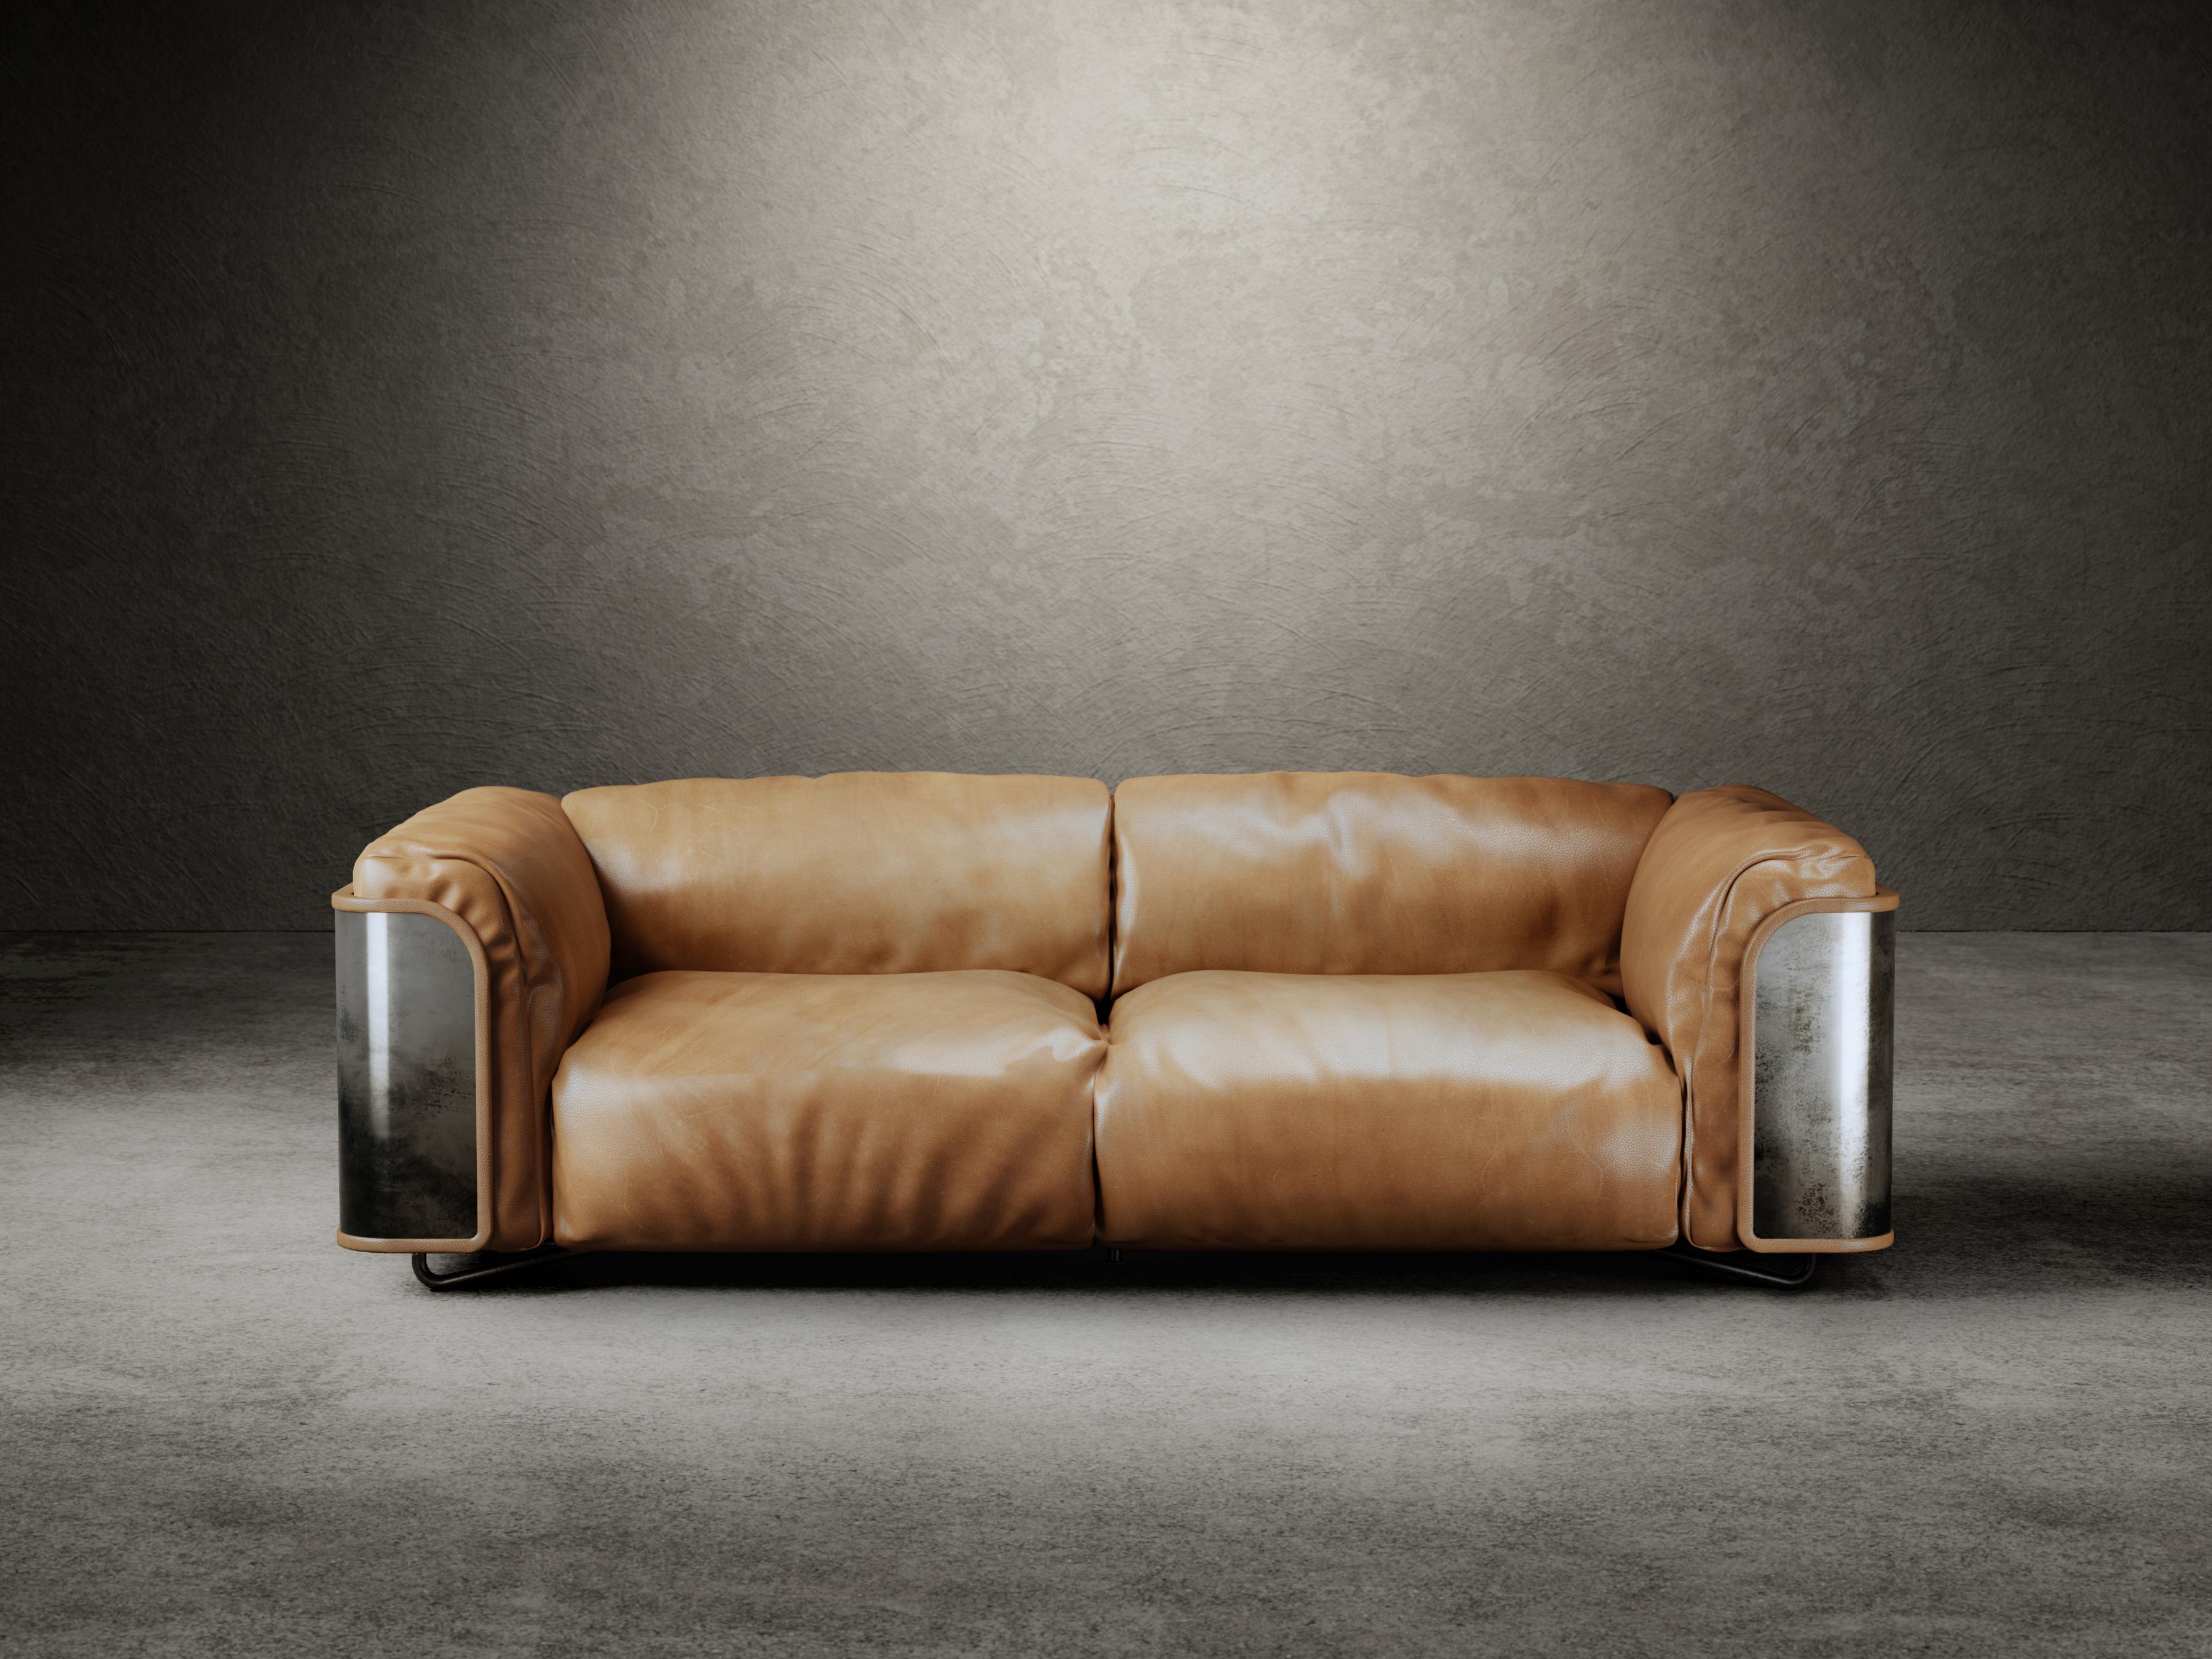 Modern Saint-Germain 2-Seat Sofa in Sella Touch Leather and raw Silver For Sale